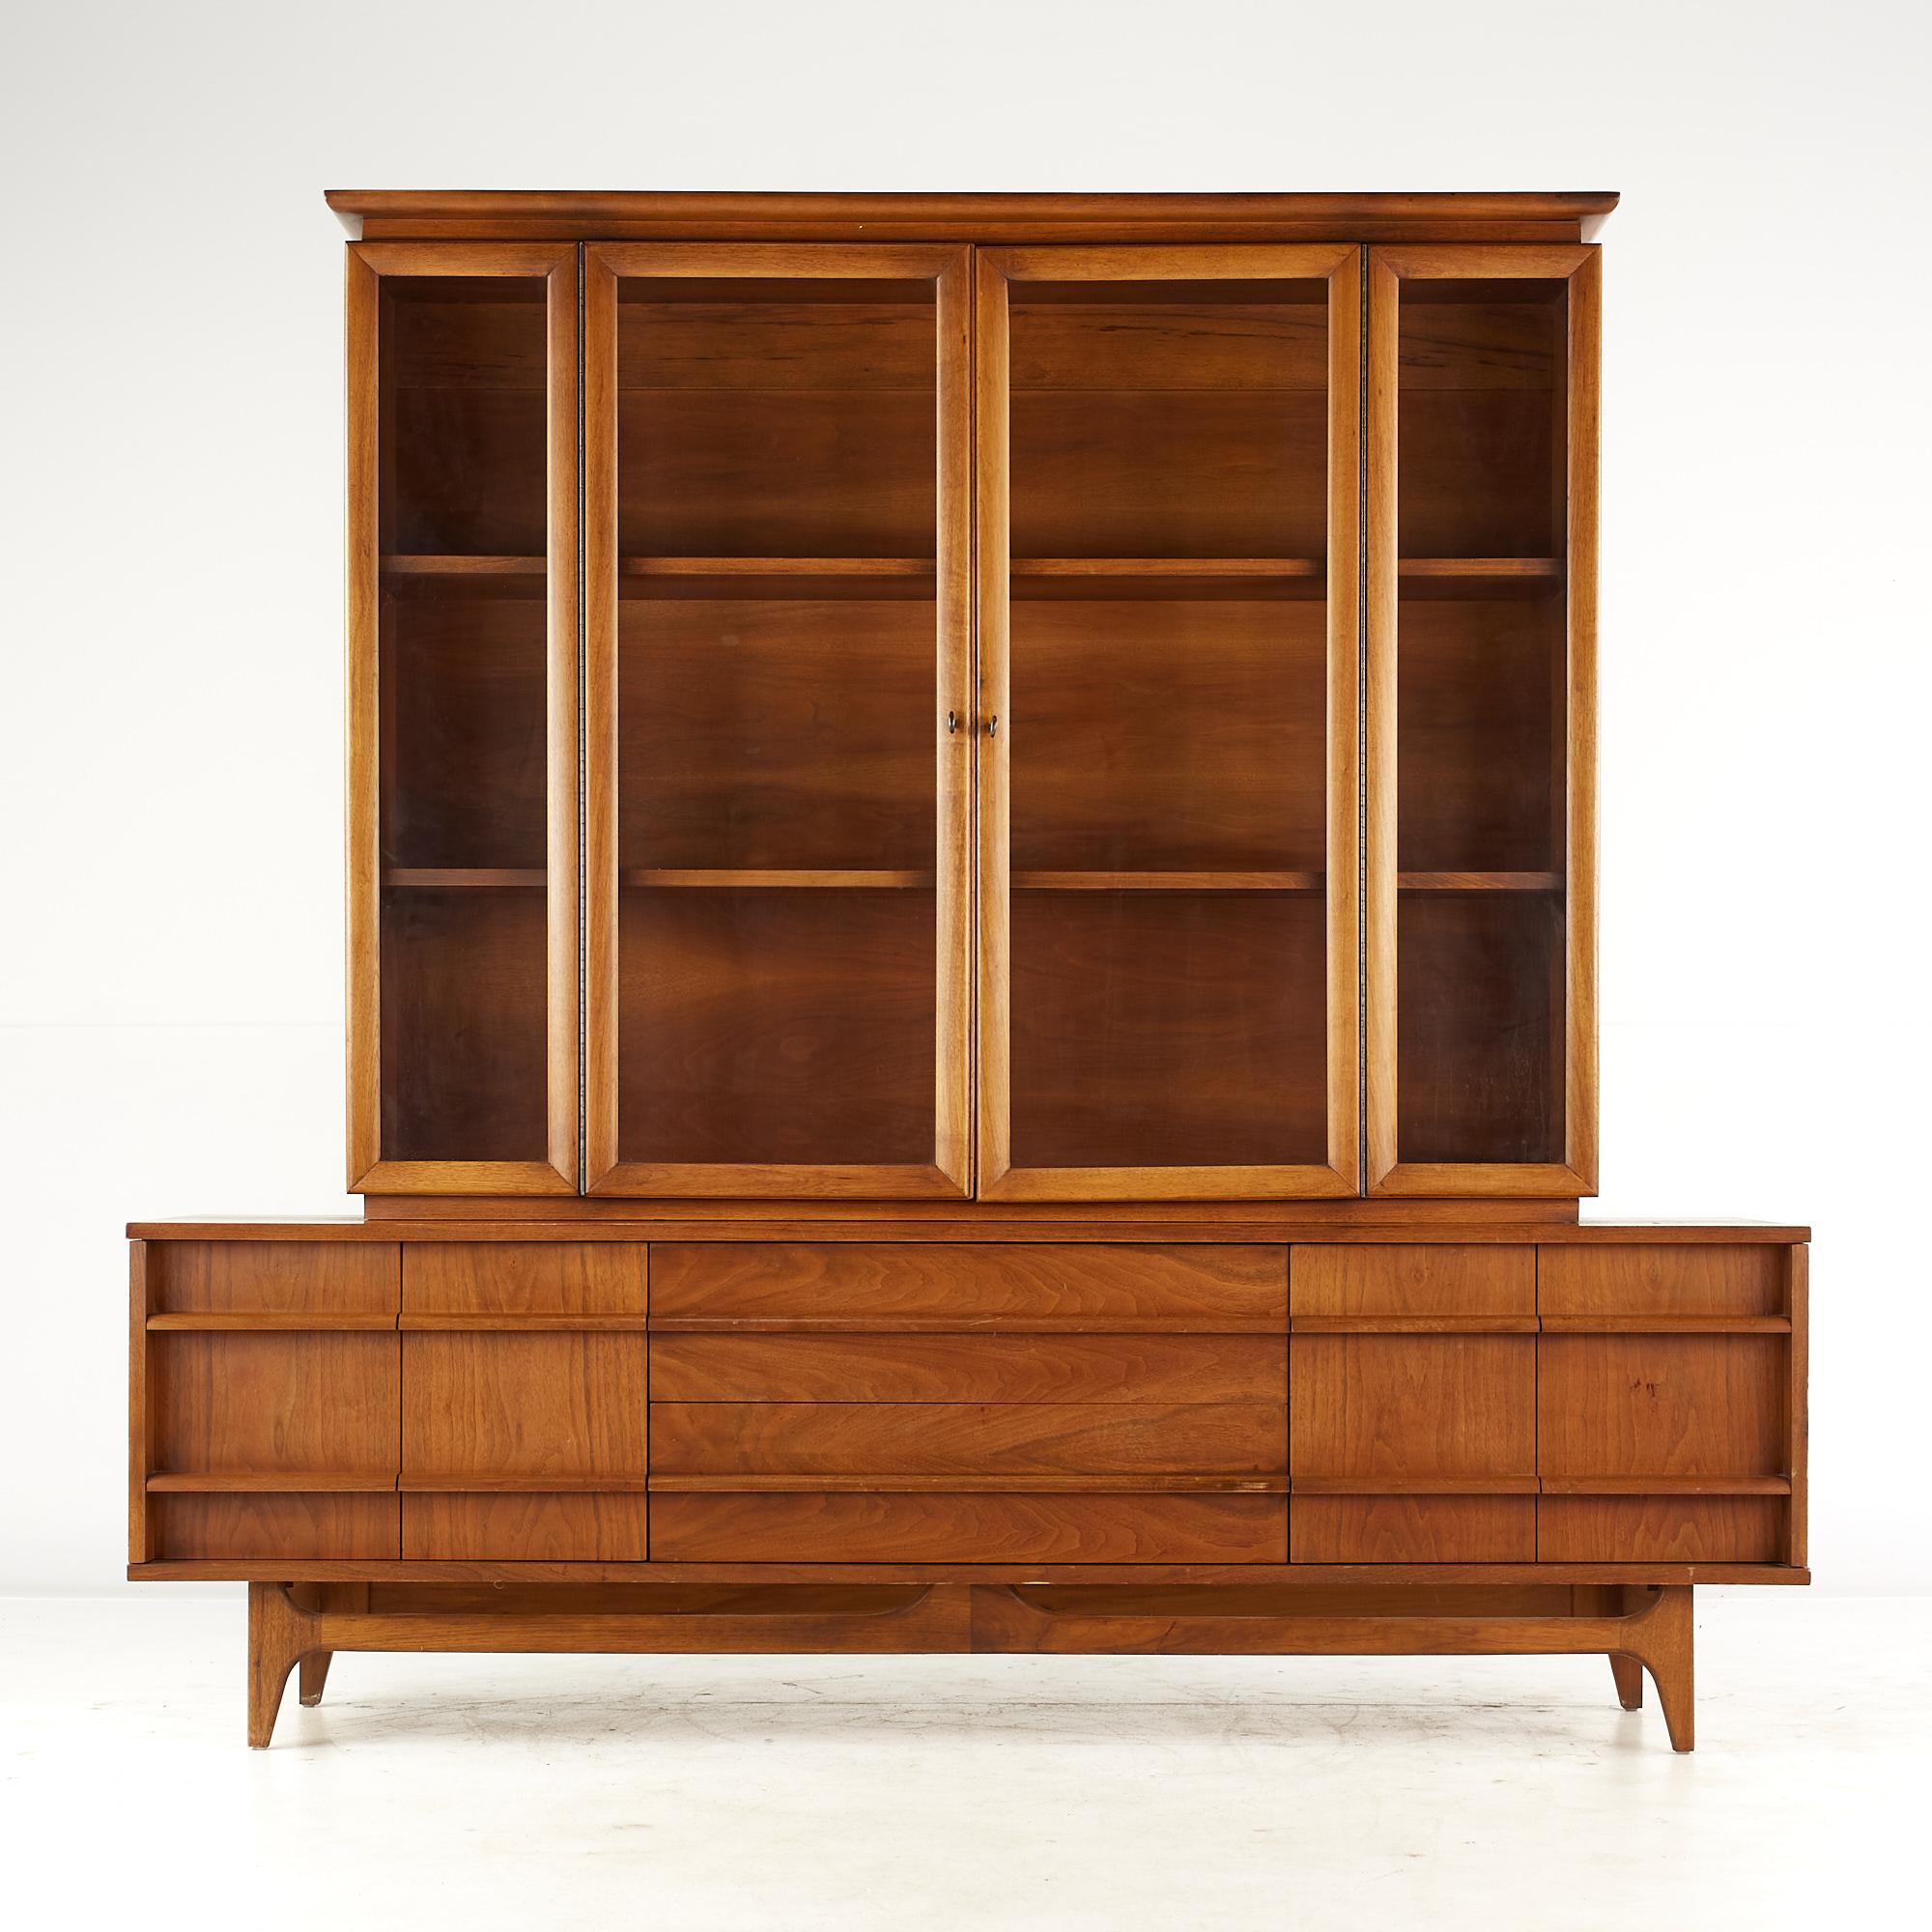 Young Manufacturing mid-century walnut curved buffet and hutch.

The buffet measures: 64 wide x 19 deep x 24.75 inches high
The hutch measures: 60 wide x 12.5 deep x 49 inches high
The combined height of the buffet and hutch is 73.75